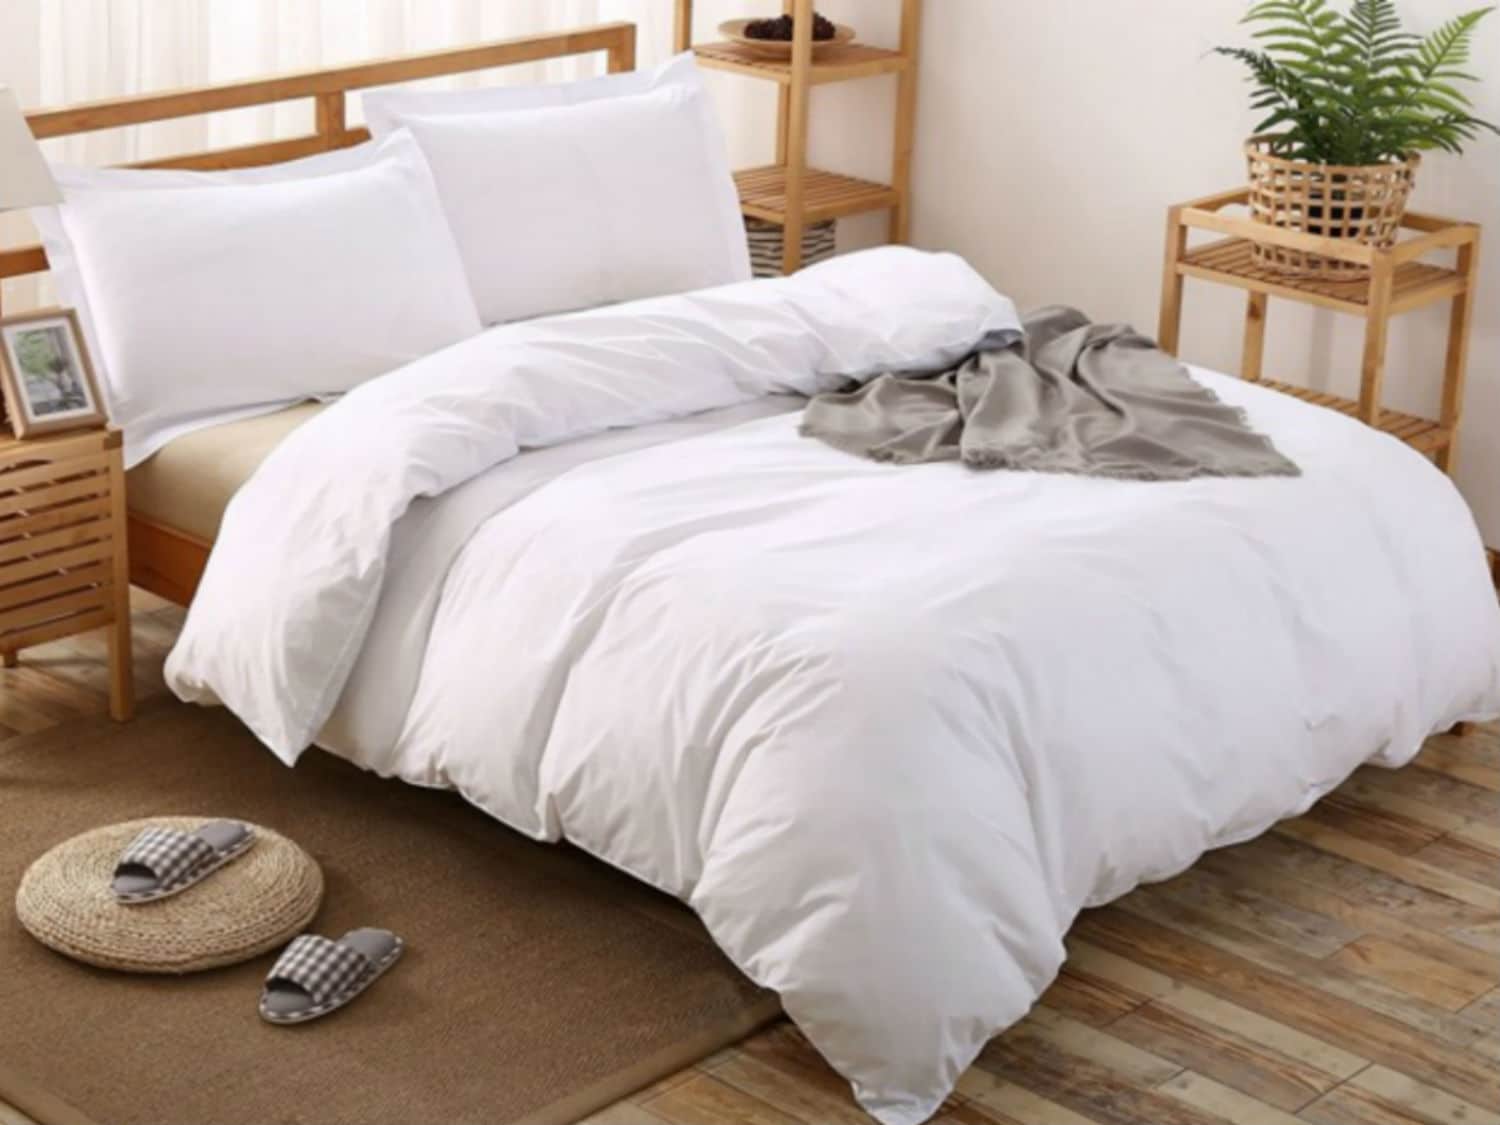 Benefits of a White Comforter: Get a Good Night’s Sleep Every Night